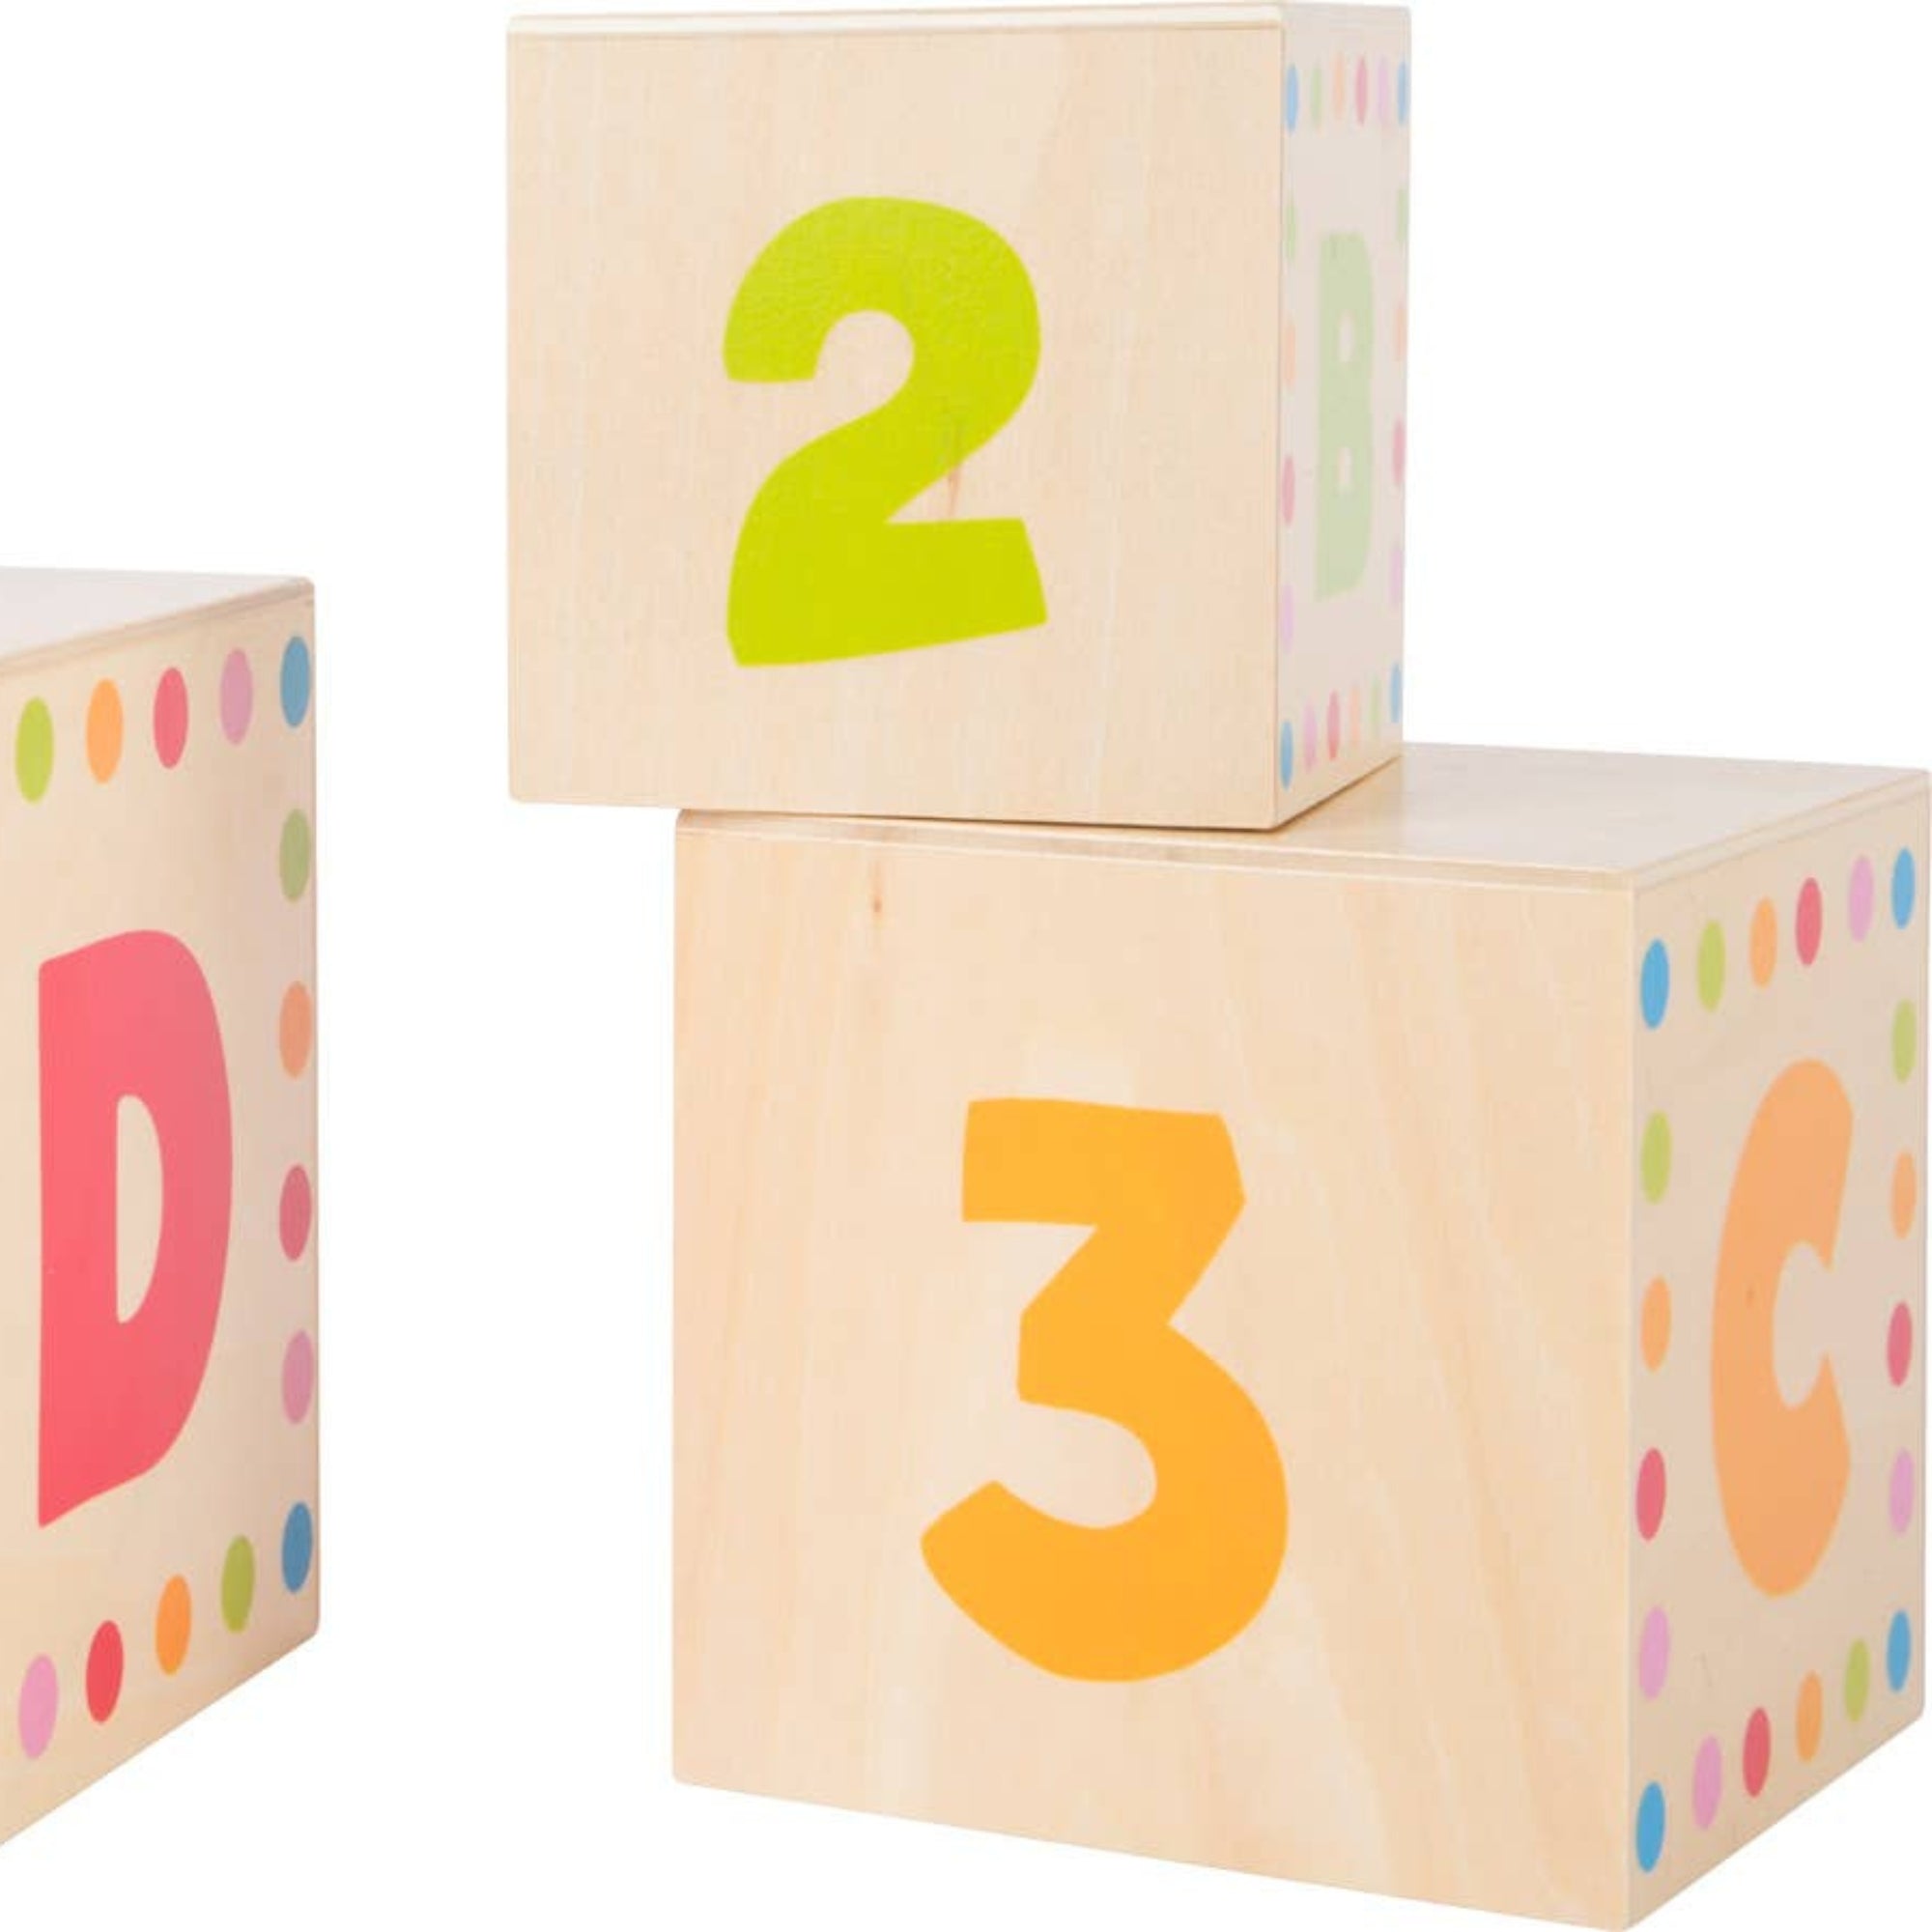 Abc Stacking Cubes, Graduating in size, these delightful Abc Stacking Cubes need to be stacked in the correct order, from largest to smallest, to create a tower. Each Abc Stacking Cubes features a detailed scene with numbers and animals. As little ones stack each Abc Stacking Cubes, they can discuss the pet on one side, developing their language skills and vocabulary. Perfect for early learning, these cubes are a versatile learning aid. Abc Stacking Cubes Once playtime is over, the stacking blocks nest toge